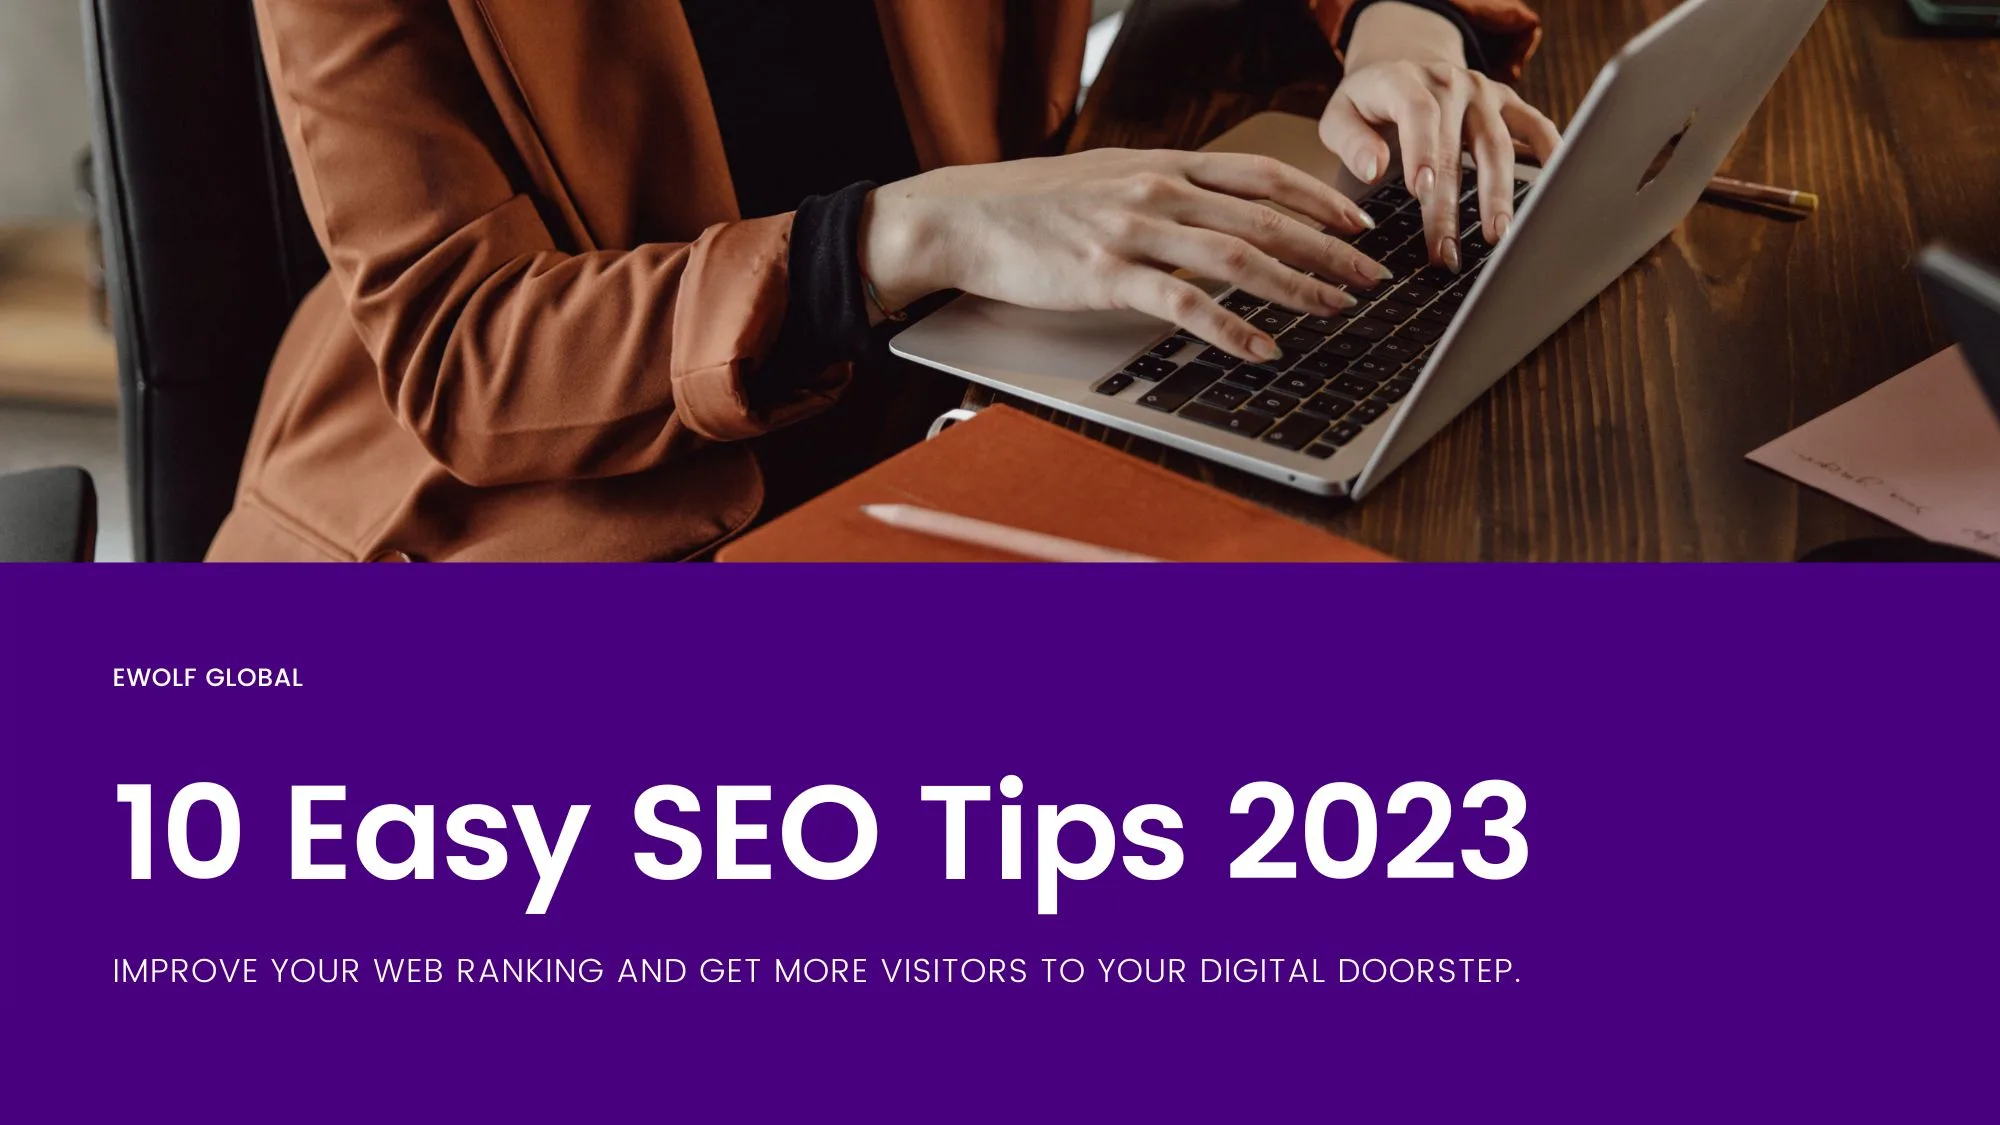 10 Easy SEO Tips to Improve Your Website Ranking